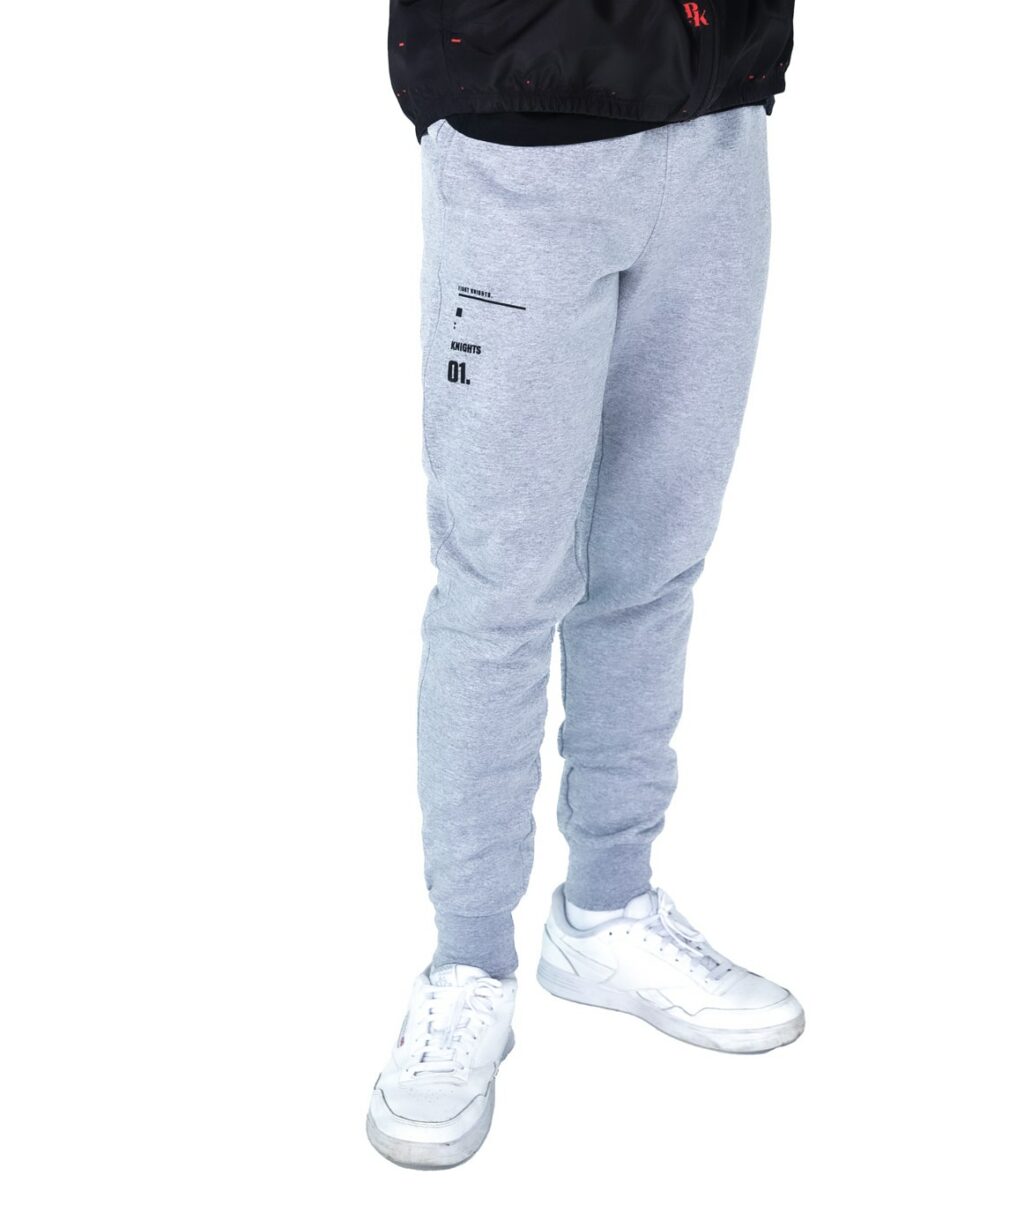 Knights of Valor Joggers